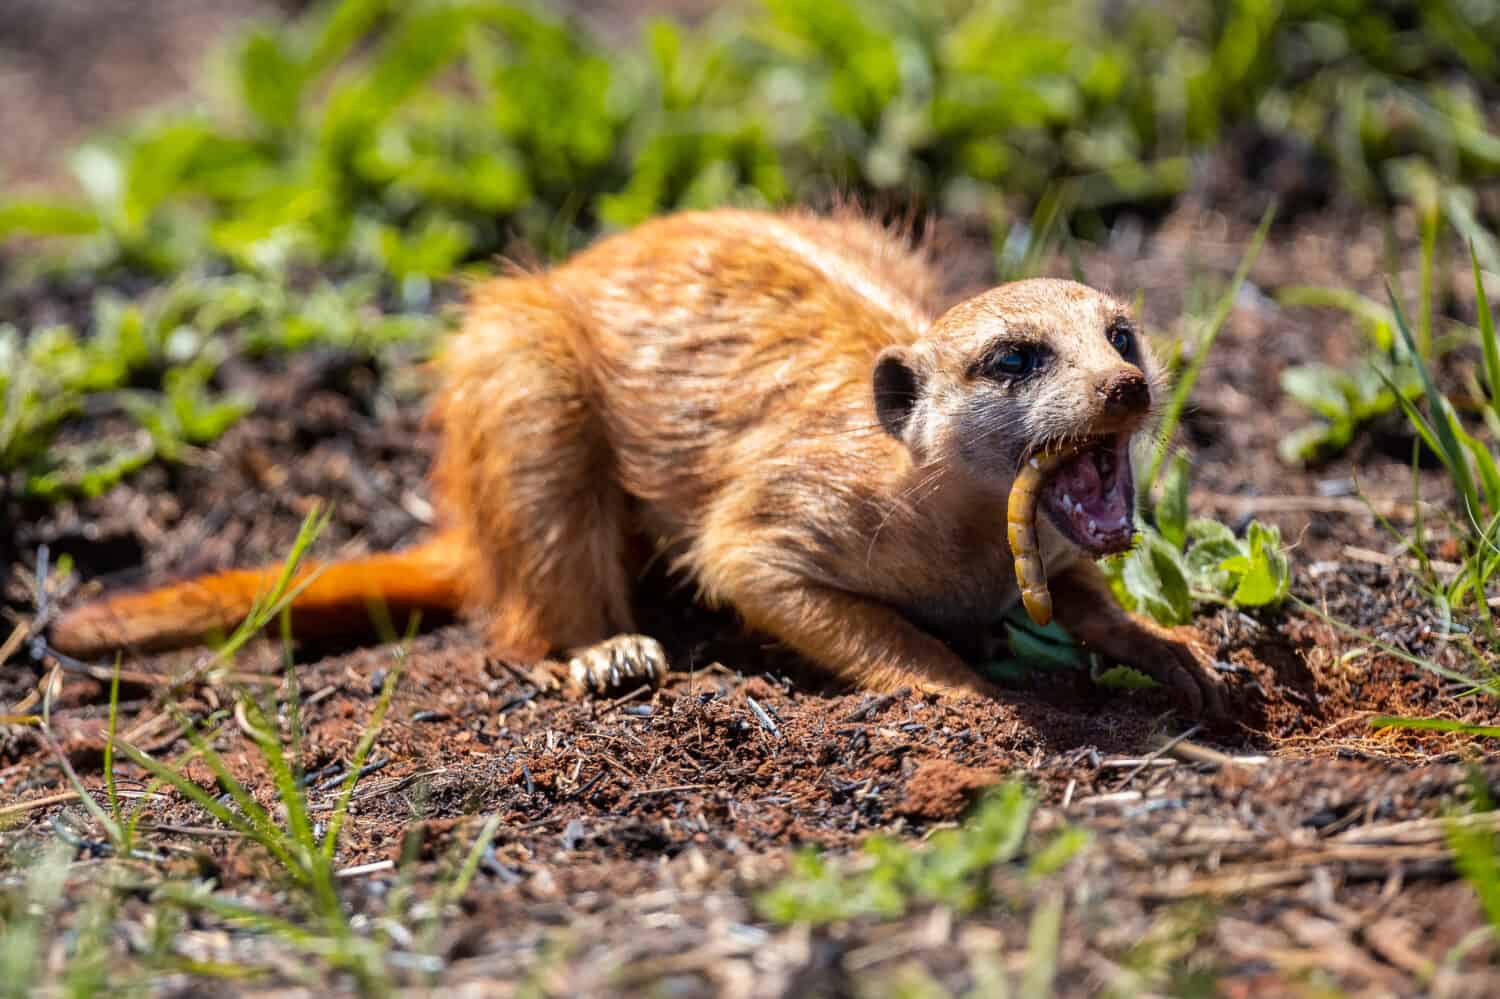 Meerkat digging in the soil to hunt worms for eating in the sunlight